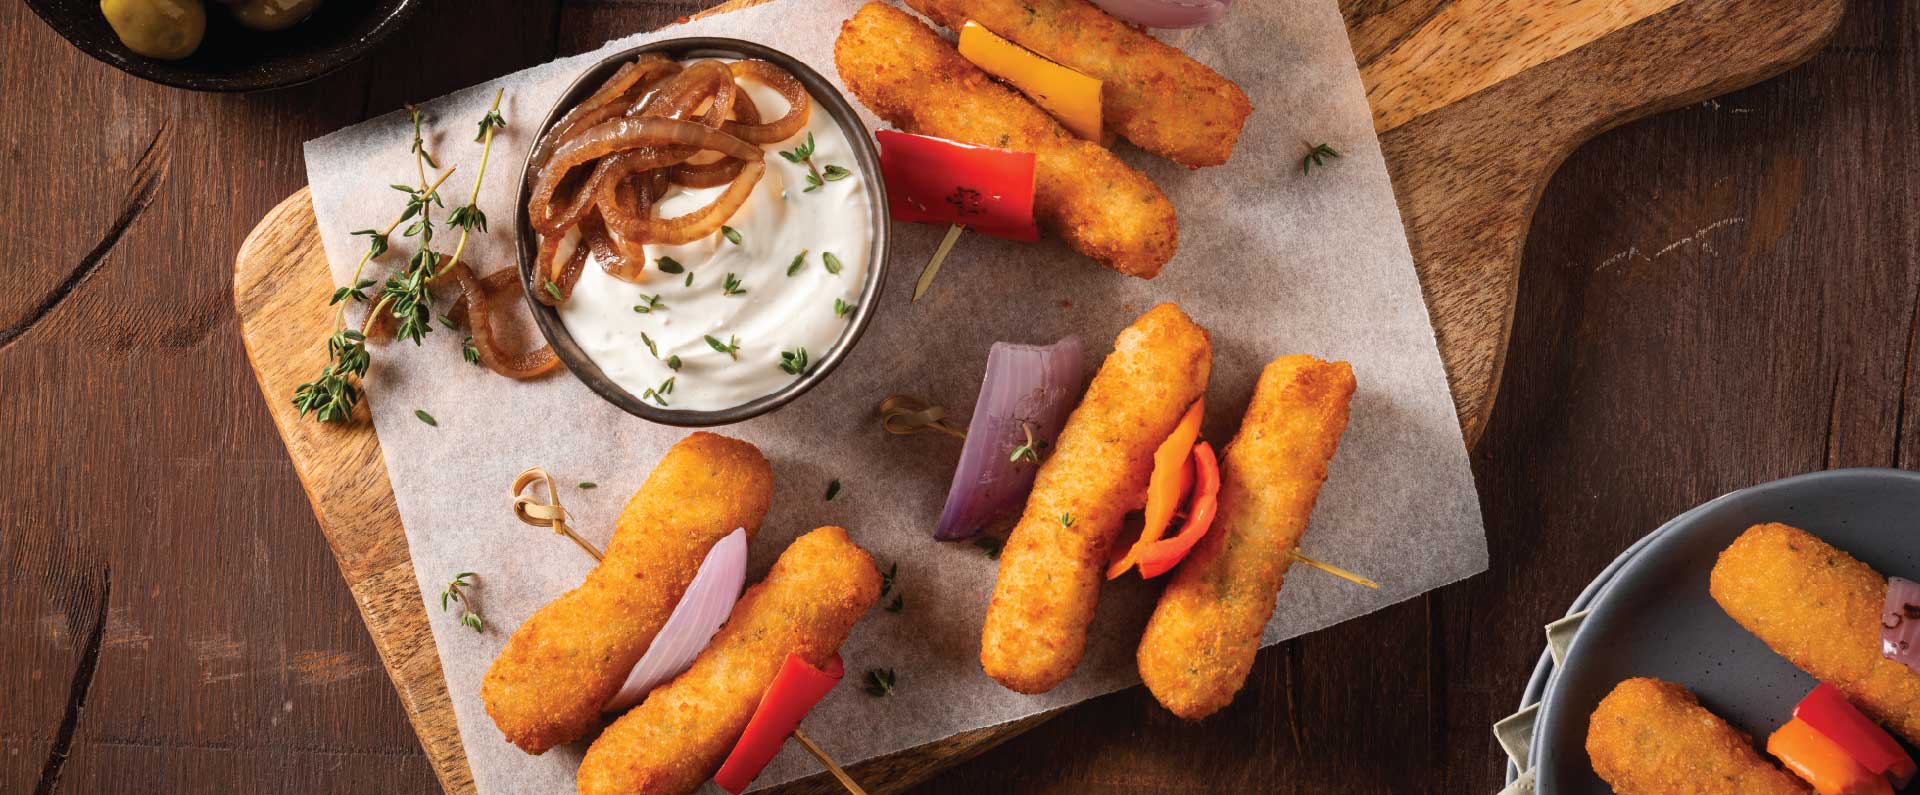 McCain Veggie Fingers Skewer With A Cream Cheese And Caramelized Onion Dip